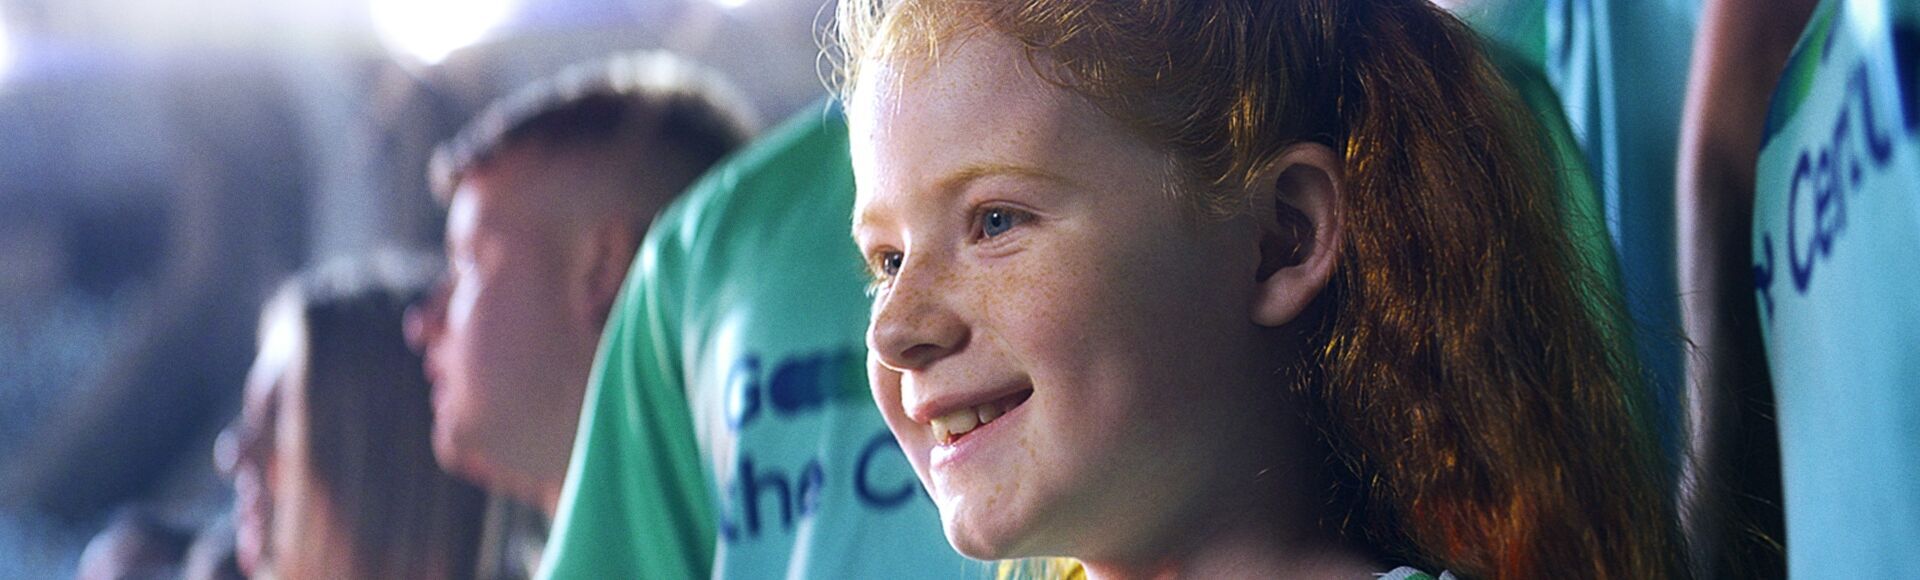 A young girl with red hair smiling surrounded by football fans with blue and green Team Century jerseys on.